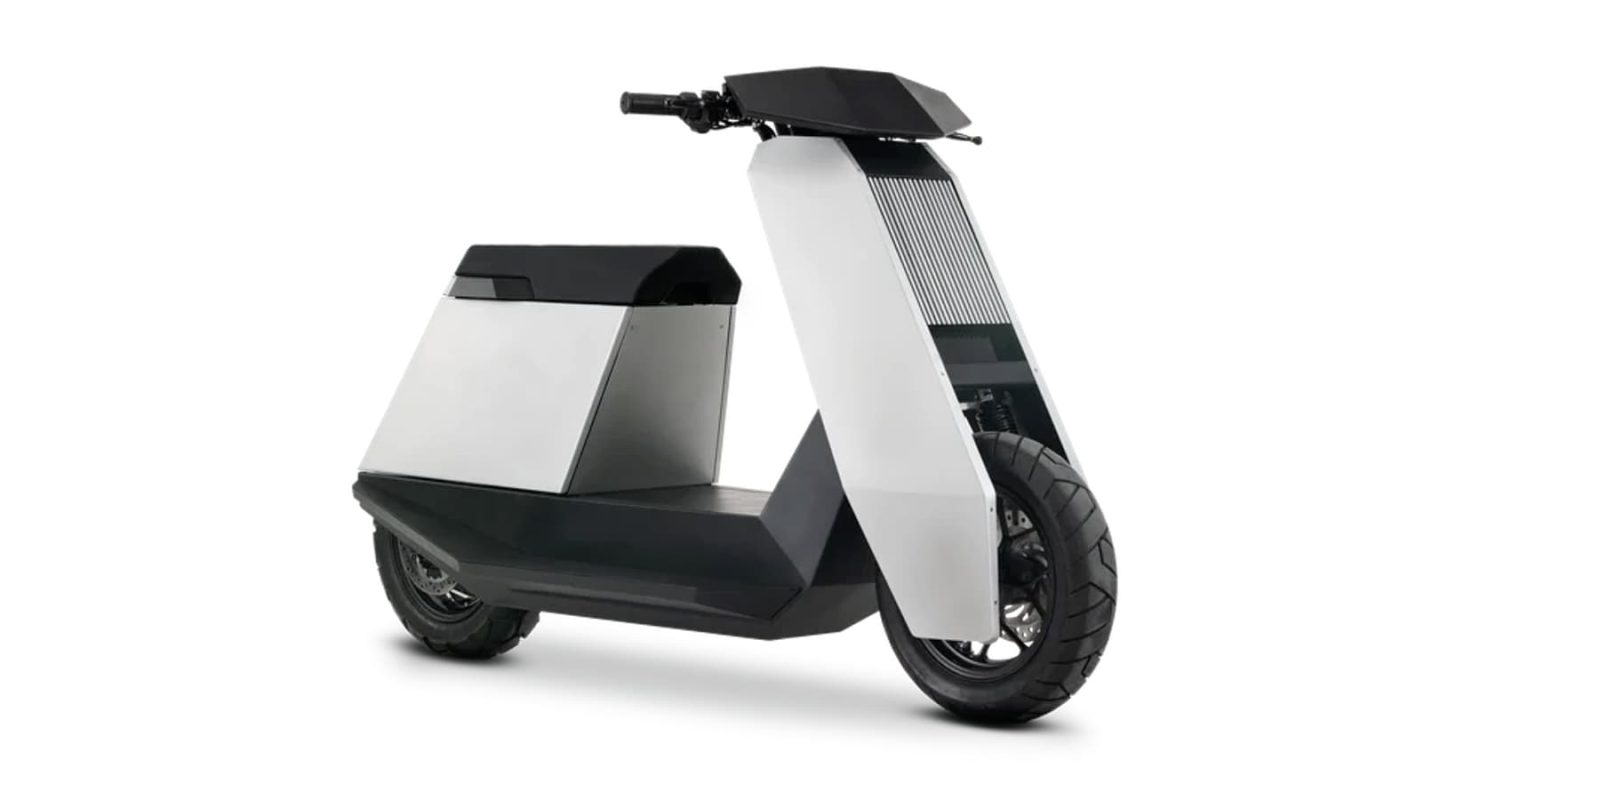 cybertruck-inspired 55 mph electric scooter actually does it justice